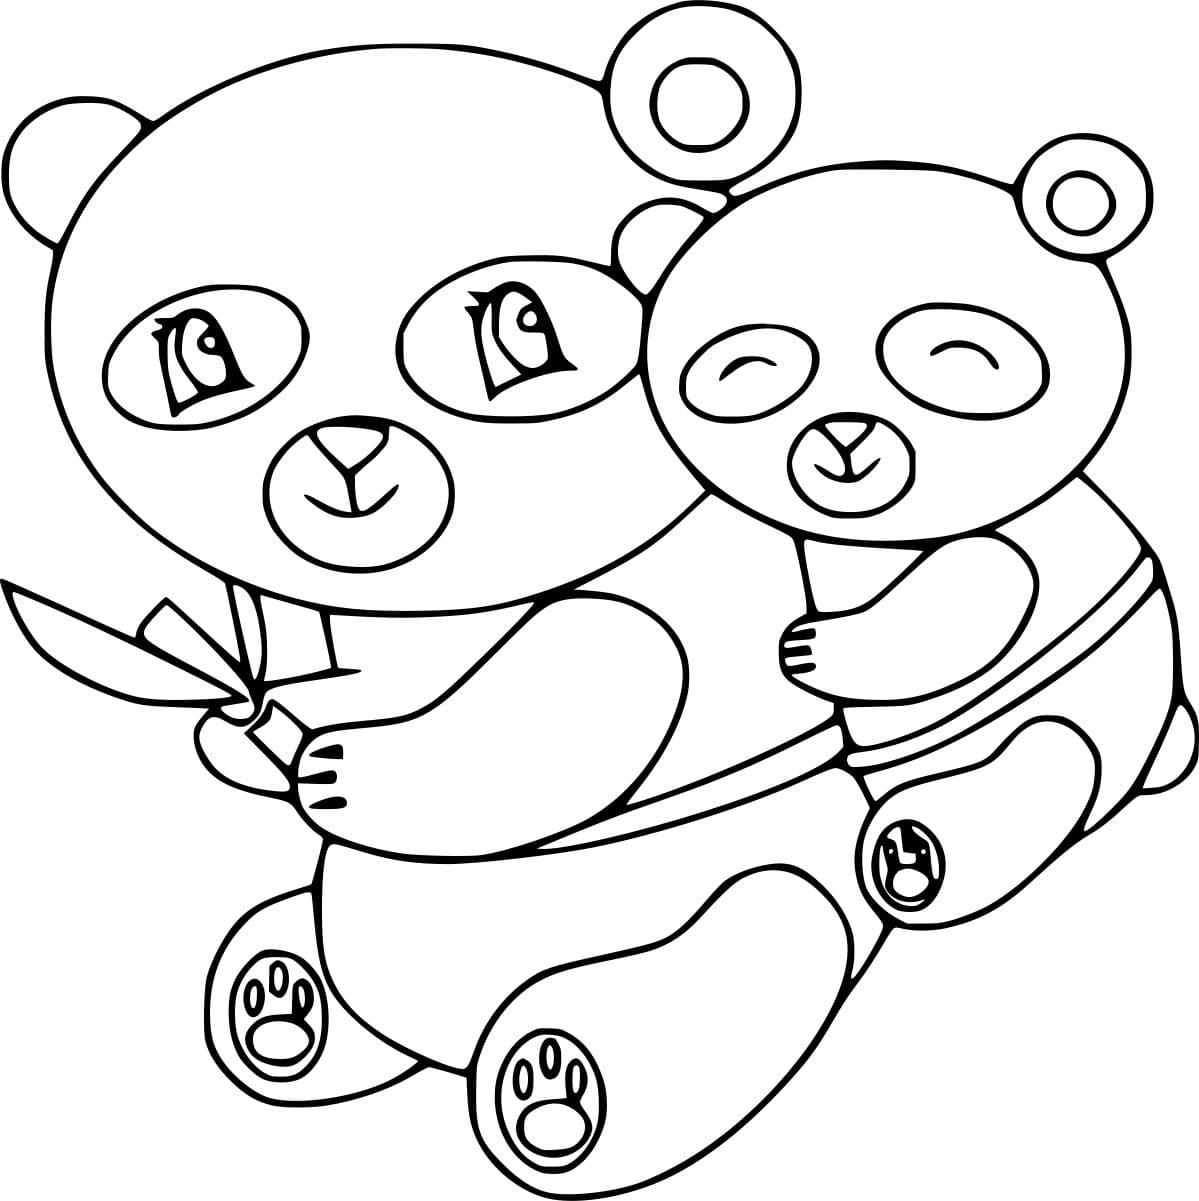 Panda Mother And Baby Coloring Page